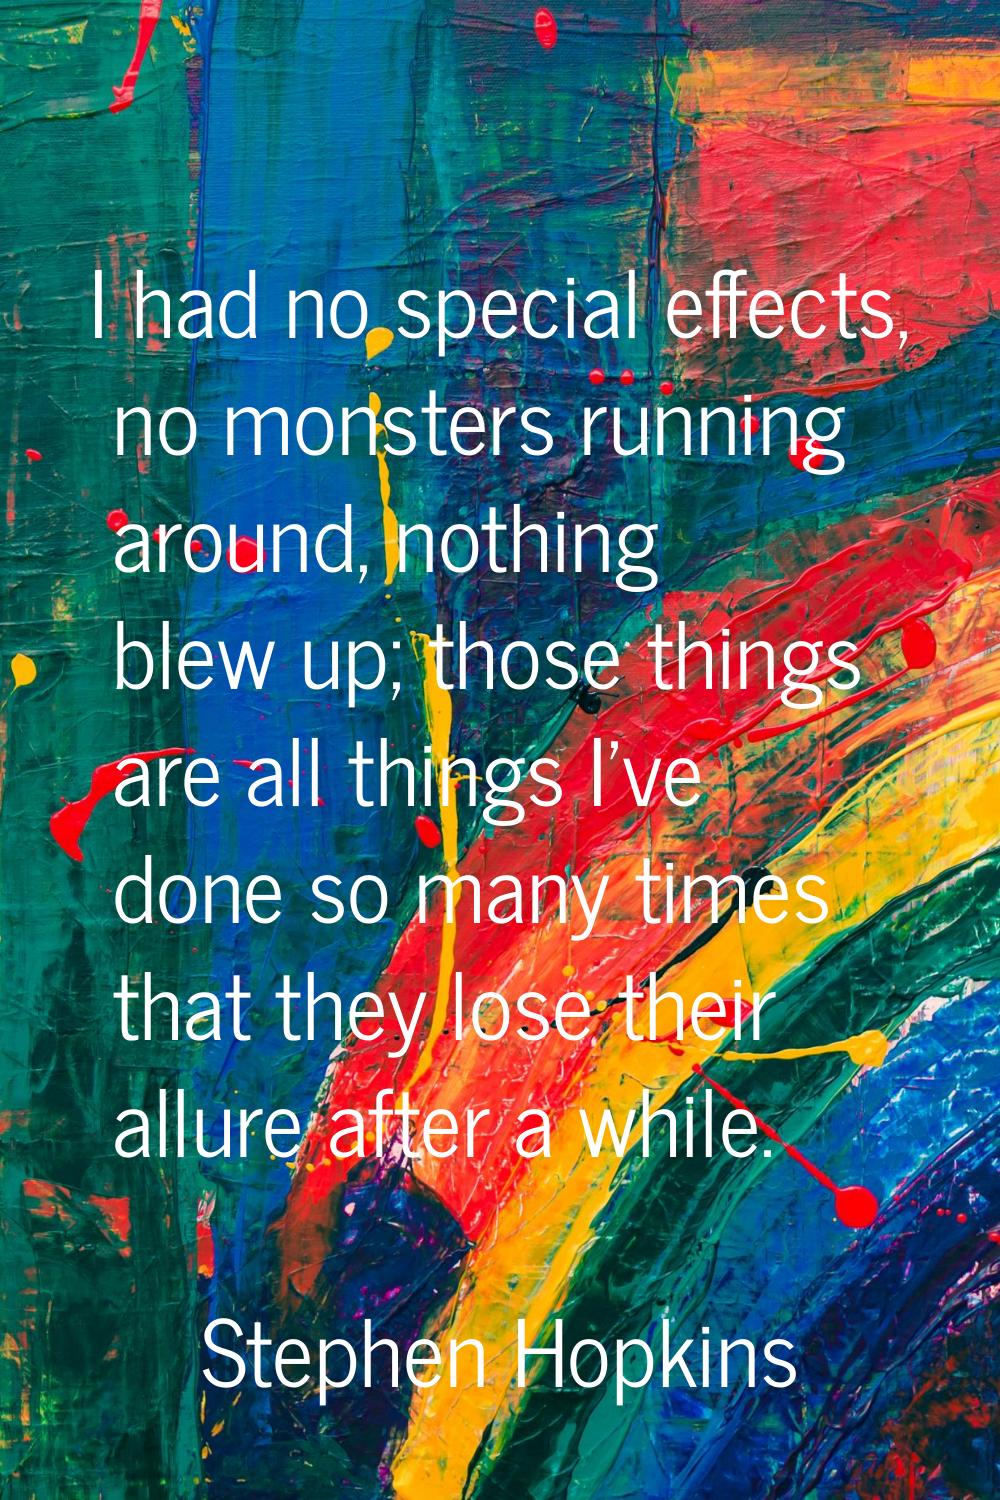 I had no special effects, no monsters running around, nothing blew up; those things are all things 